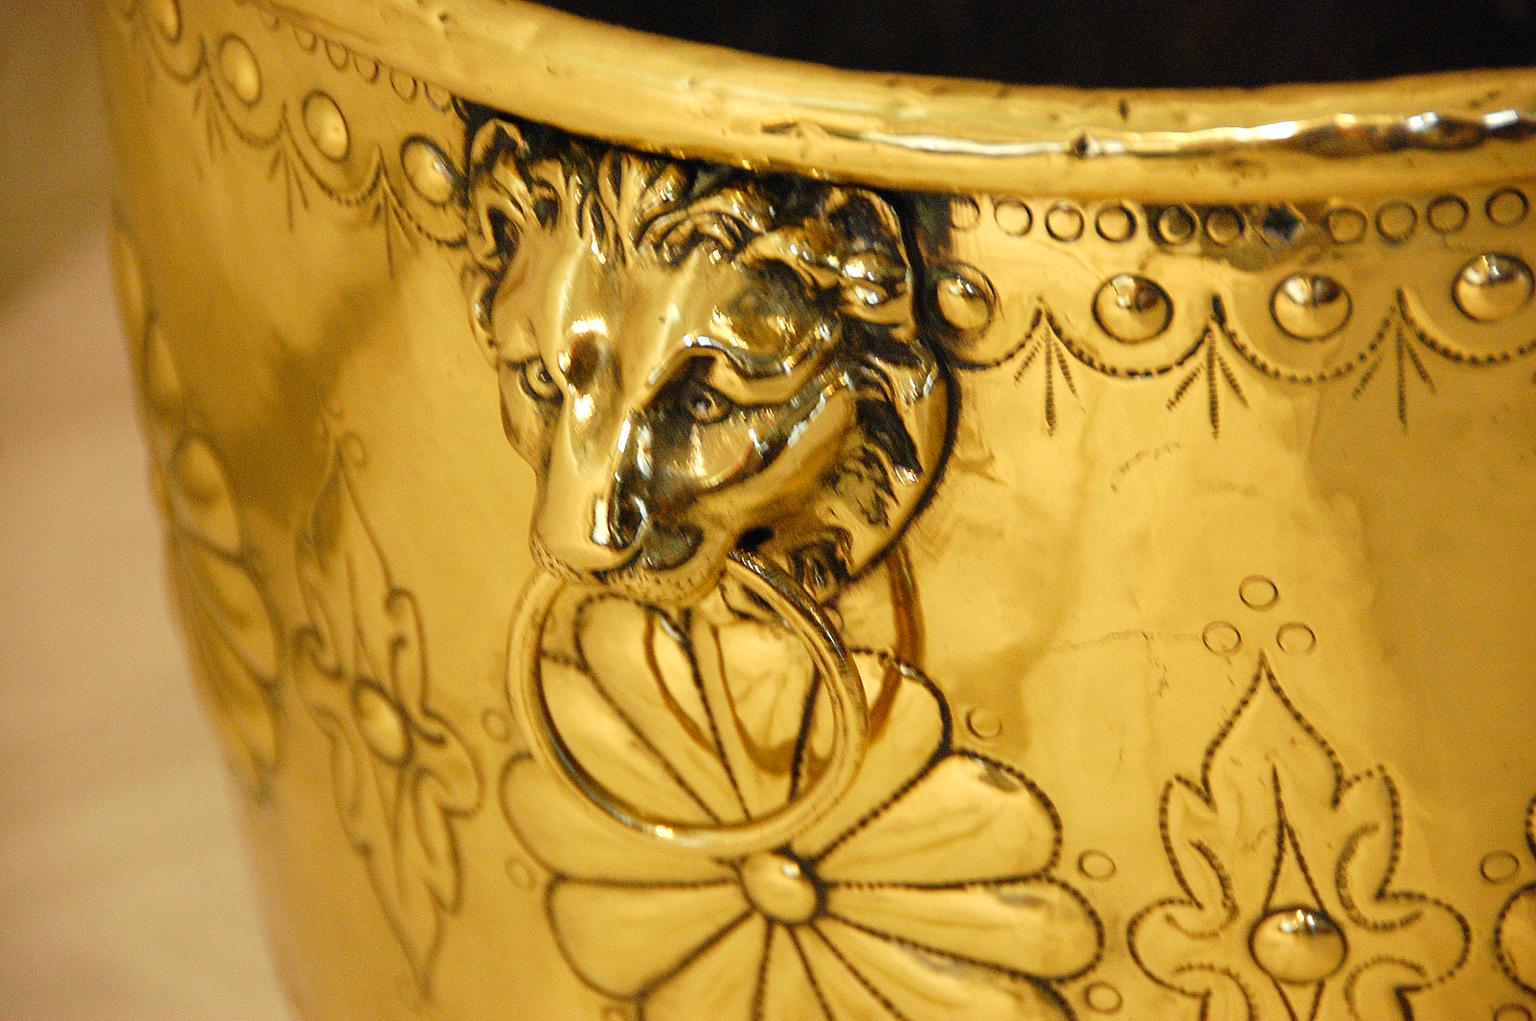 English 19th century brass jardinière or log bin with repousse decoration and lion side handles. 16 Inch diameter (not including handles) and 14 1/2 inches high make it the perfect size for next to a fireplace.